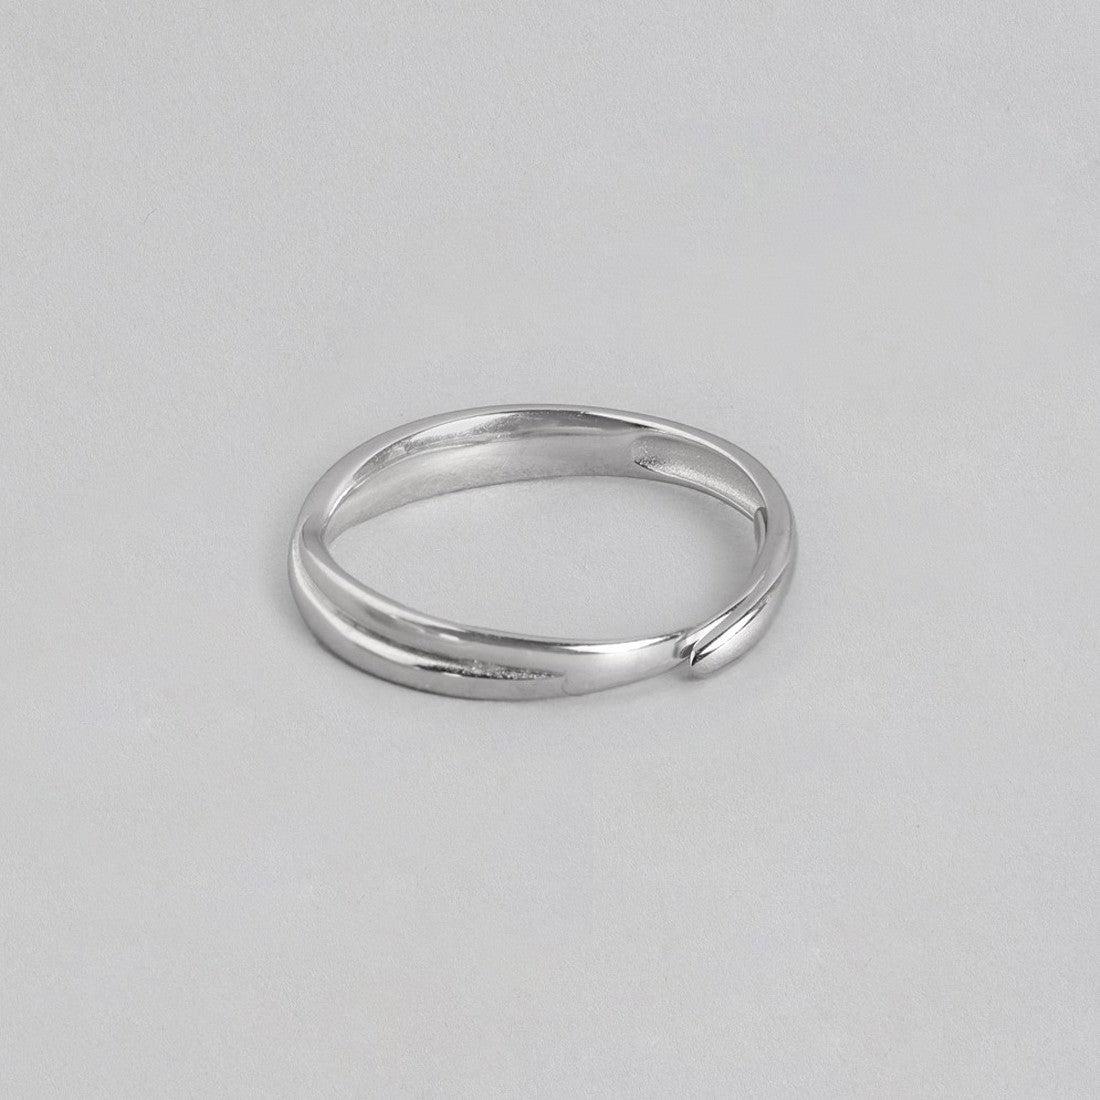 Crossover Rhodium Plated 925 Sterling Silver Ring For Him